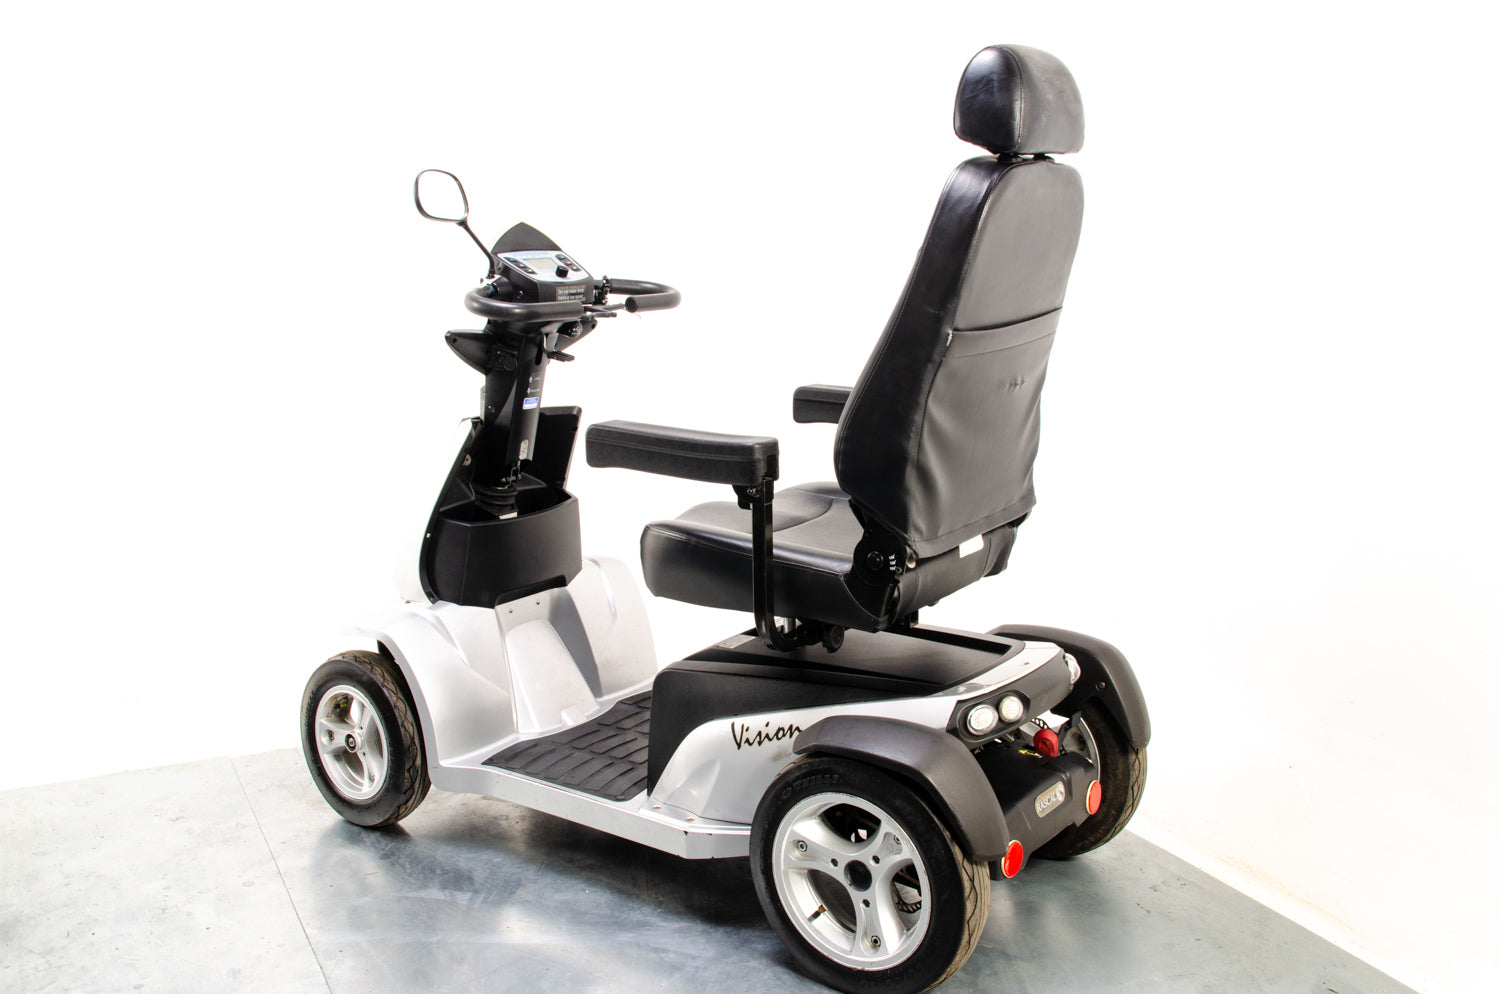 Rascal Vision Used Electric Mobility Scooter 8mph Large All-Terrain Road Legal Silver Pneumatic Tyres 13336